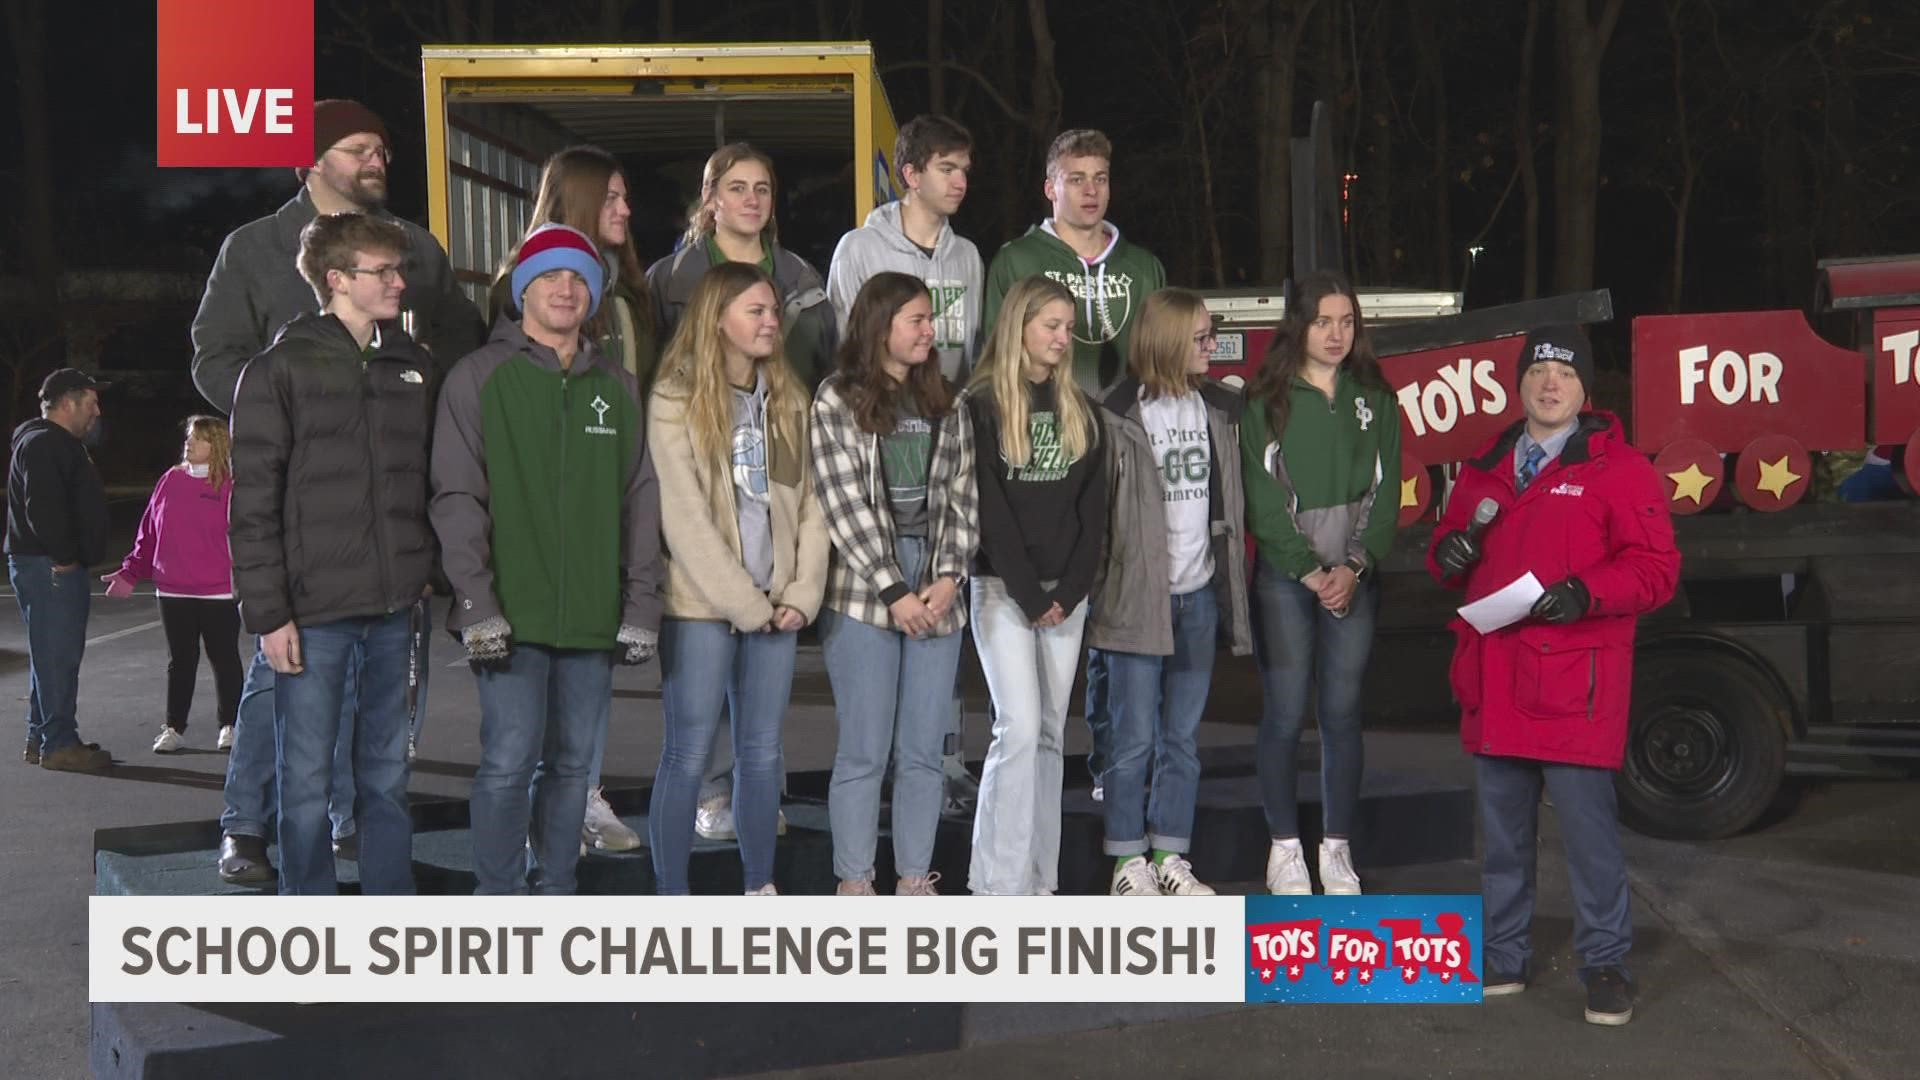 From friendly competitions between schools to hosting toy drives, students tell us how they collected hundreds of toys to donate to Toys for Tots.